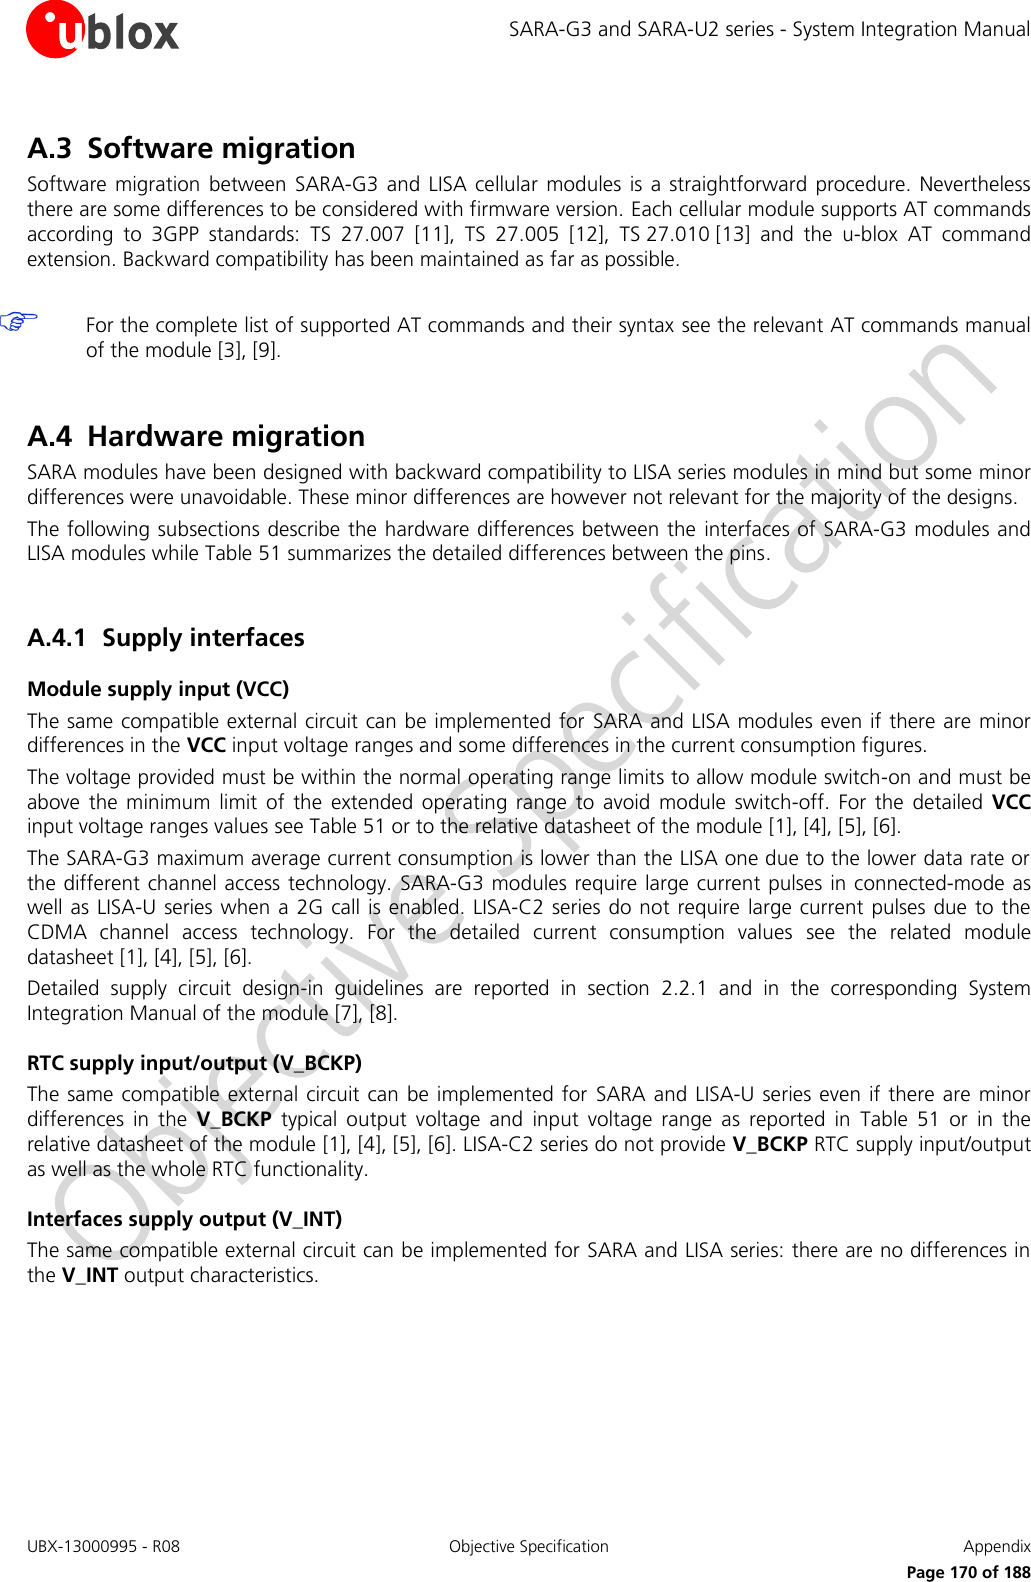 SARA-G3 and SARA-U2 series - System Integration Manual UBX-13000995 - R08  Objective Specification  Appendix      Page 170 of 188 A.3 Software migration Software  migration  between  SARA-G3 and LISA cellular modules is a  straightforward  procedure. Nevertheless there are some differences to be considered with firmware version. Each cellular module supports AT commands according  to  3GPP  standards:  TS  27.007  [11],  TS 27.005  [12],  TS 27.010 [13]  and  the  u-blox  AT  command extension. Backward compatibility has been maintained as far as possible.   For the complete list of supported AT commands and their syntax see the relevant AT commands manual of the module [3], [9].  A.4 Hardware migration SARA modules have been designed with backward compatibility to LISA series modules in mind but some minor differences were unavoidable. These minor differences are however not relevant for the majority of the designs. The following subsections describe the hardware differences between the  interfaces of SARA-G3 modules and LISA modules while Table 51 summarizes the detailed differences between the pins.  A.4.1 Supply interfaces Module supply input (VCC) The same compatible external circuit can be implemented for  SARA and LISA modules even if there are minor differences in the VCC input voltage ranges and some differences in the current consumption figures. The voltage provided must be within the normal operating range limits to allow module switch-on and must be above  the  minimum  limit  of  the  extended  operating  range  to  avoid  module  switch-off.  For  the  detailed  VCC input voltage ranges values see Table 51 or to the relative datasheet of the module [1], [4], [5], [6]. The SARA-G3 maximum average current consumption is lower than the LISA one due to the lower data rate or the different channel access technology.  SARA-G3 modules require large current pulses in connected-mode as well as LISA-U series  when a 2G  call is enabled. LISA-C2 series do not require  large current  pulses due  to the CDMA  channel  access  technology.  For  the  detailed  current  consumption  values  see  the  related  module datasheet [1], [4], [5], [6]. Detailed  supply  circuit  design-in  guidelines  are  reported  in  section  2.2.1  and  in  the  corresponding  System Integration Manual of the module [7], [8]. RTC supply input/output (V_BCKP) The same  compatible external circuit can be  implemented for  SARA and LISA-U series even  if there are minor differences  in  the  V_BCKP  typical  output  voltage  and  input  voltage  range  as  reported  in  Table  51  or  in  the relative datasheet of the module [1], [4], [5], [6]. LISA-C2 series do not provide V_BCKP RTC supply input/output as well as the whole RTC functionality. Interfaces supply output (V_INT) The same compatible external circuit can be implemented for SARA and LISA series: there are no differences in the V_INT output characteristics. 